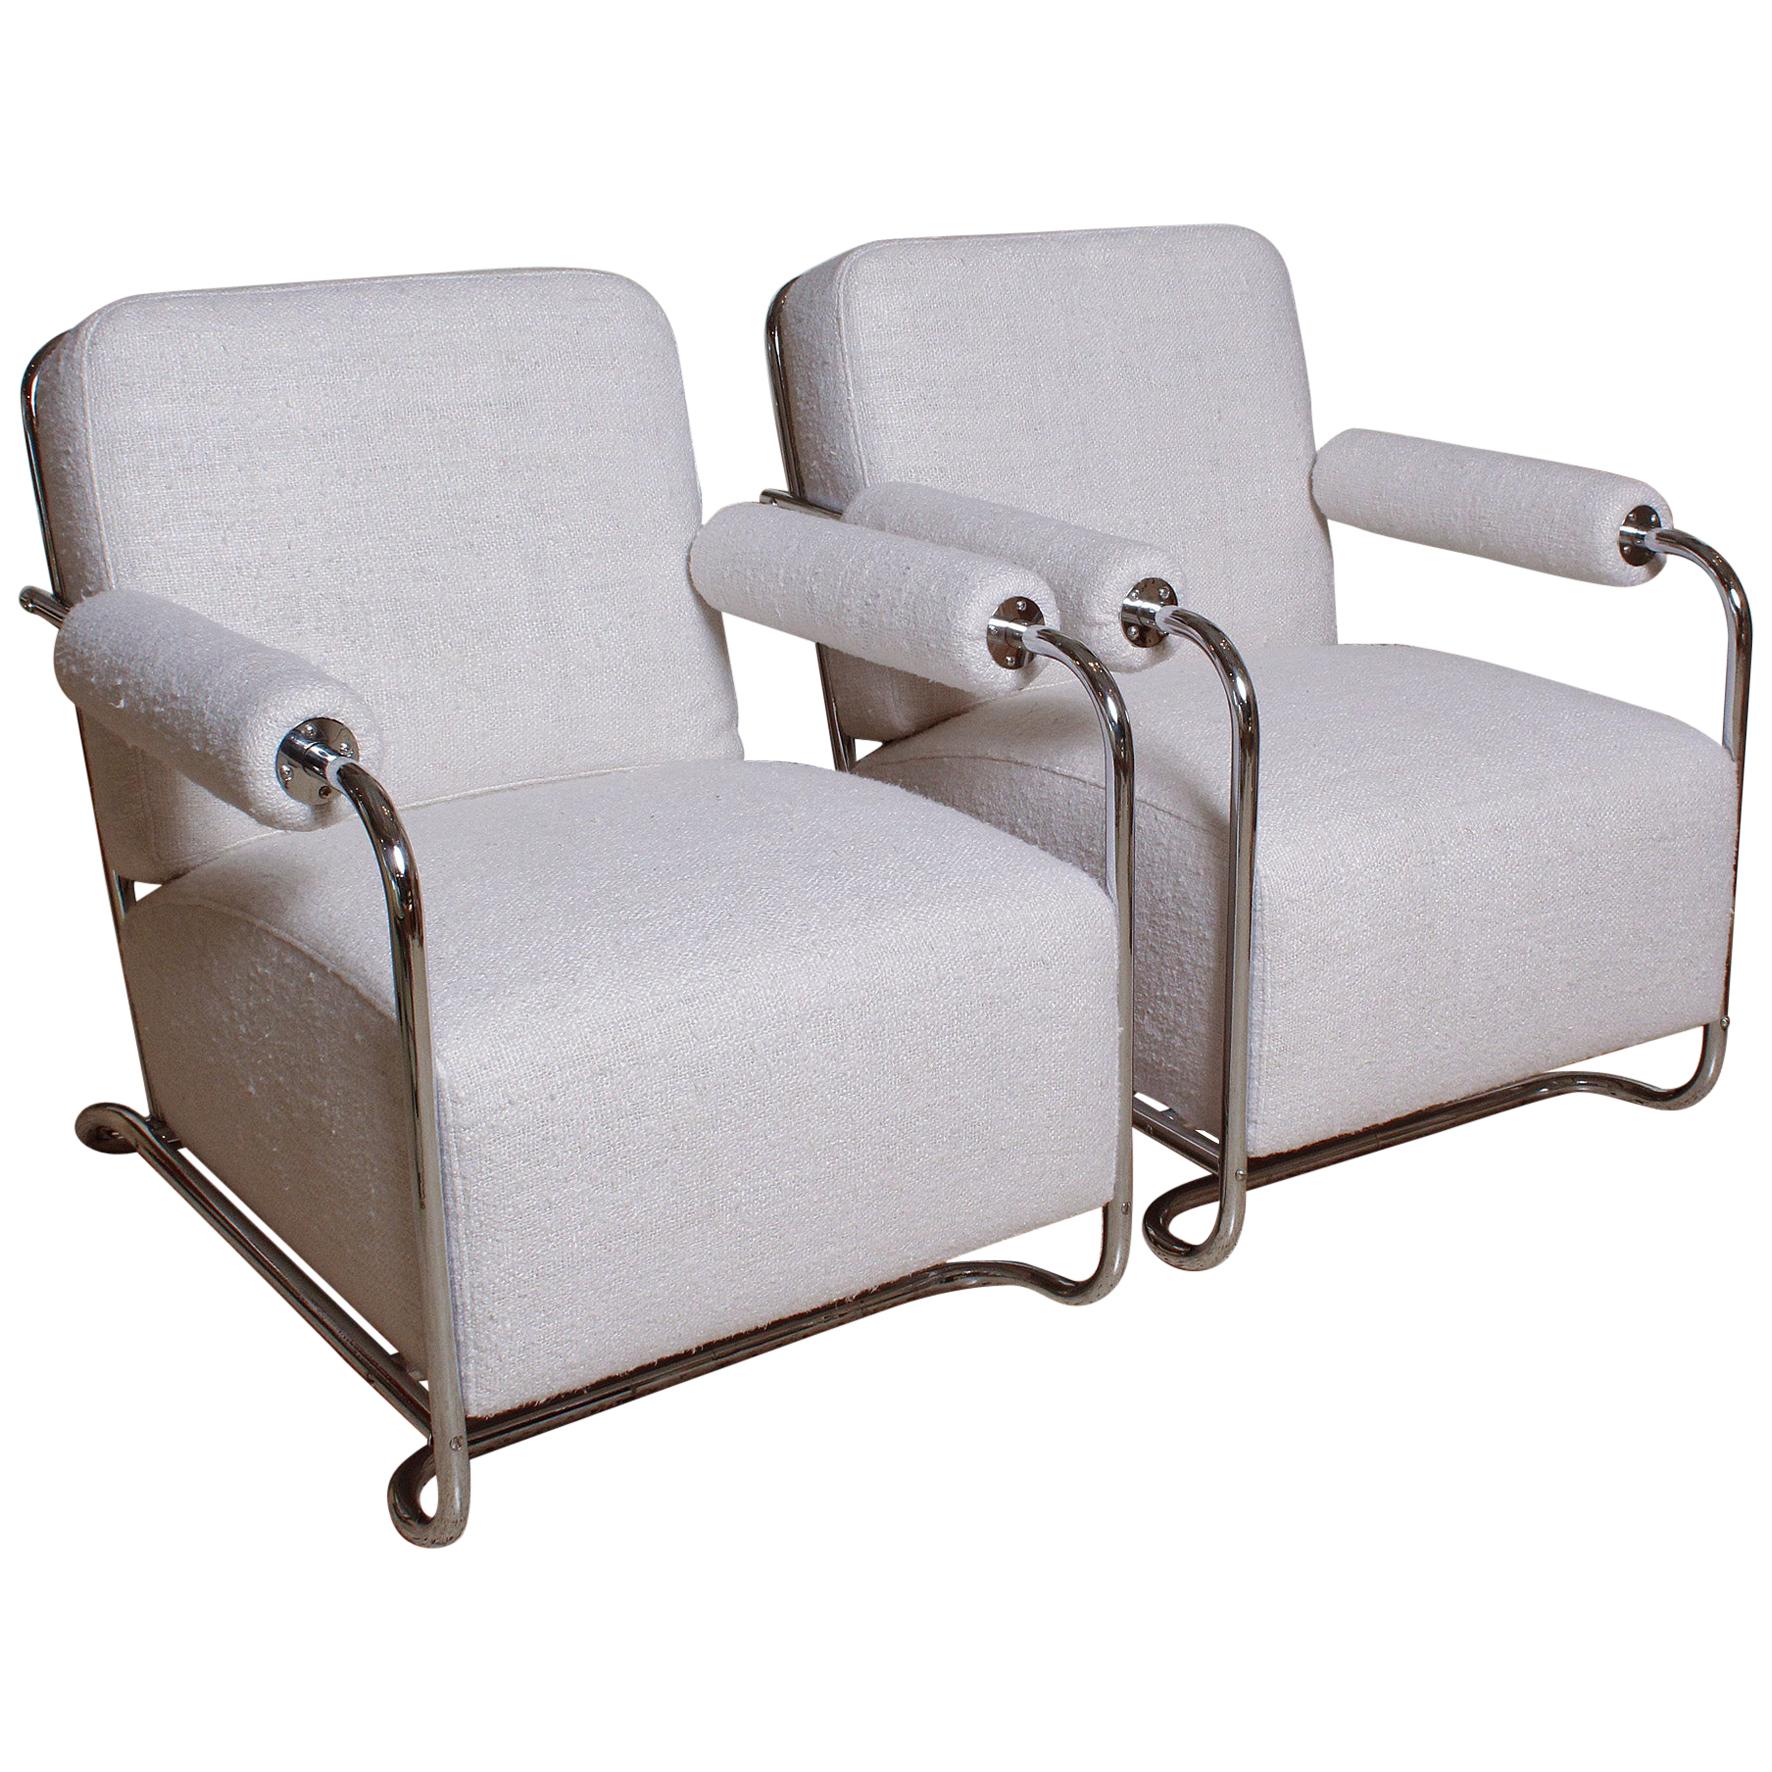 Pair of Chrome Deco Lounge Chairs by Gilbert Rohde for Troy Sunshade, circa 1935